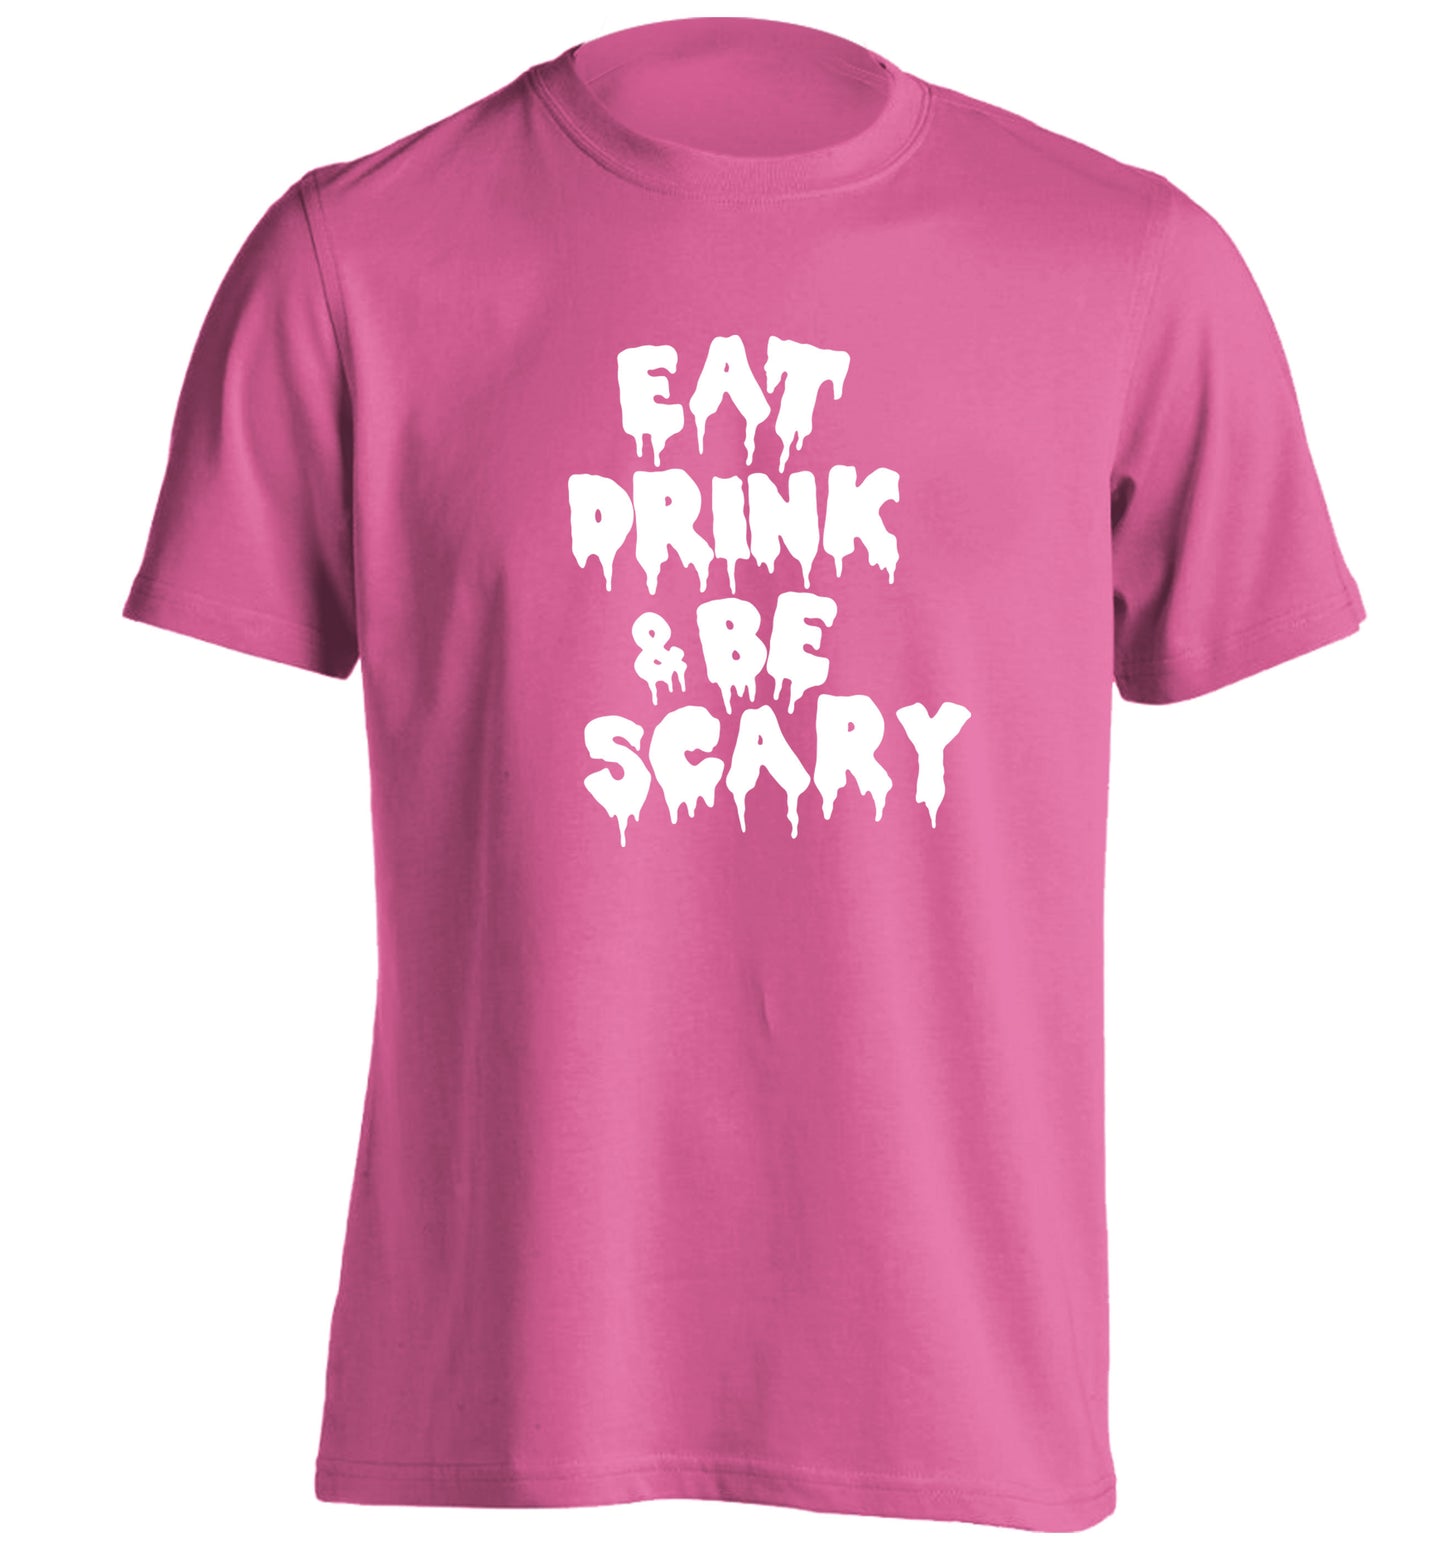 Eat drink and be scary adults unisex pink Tshirt 2XL